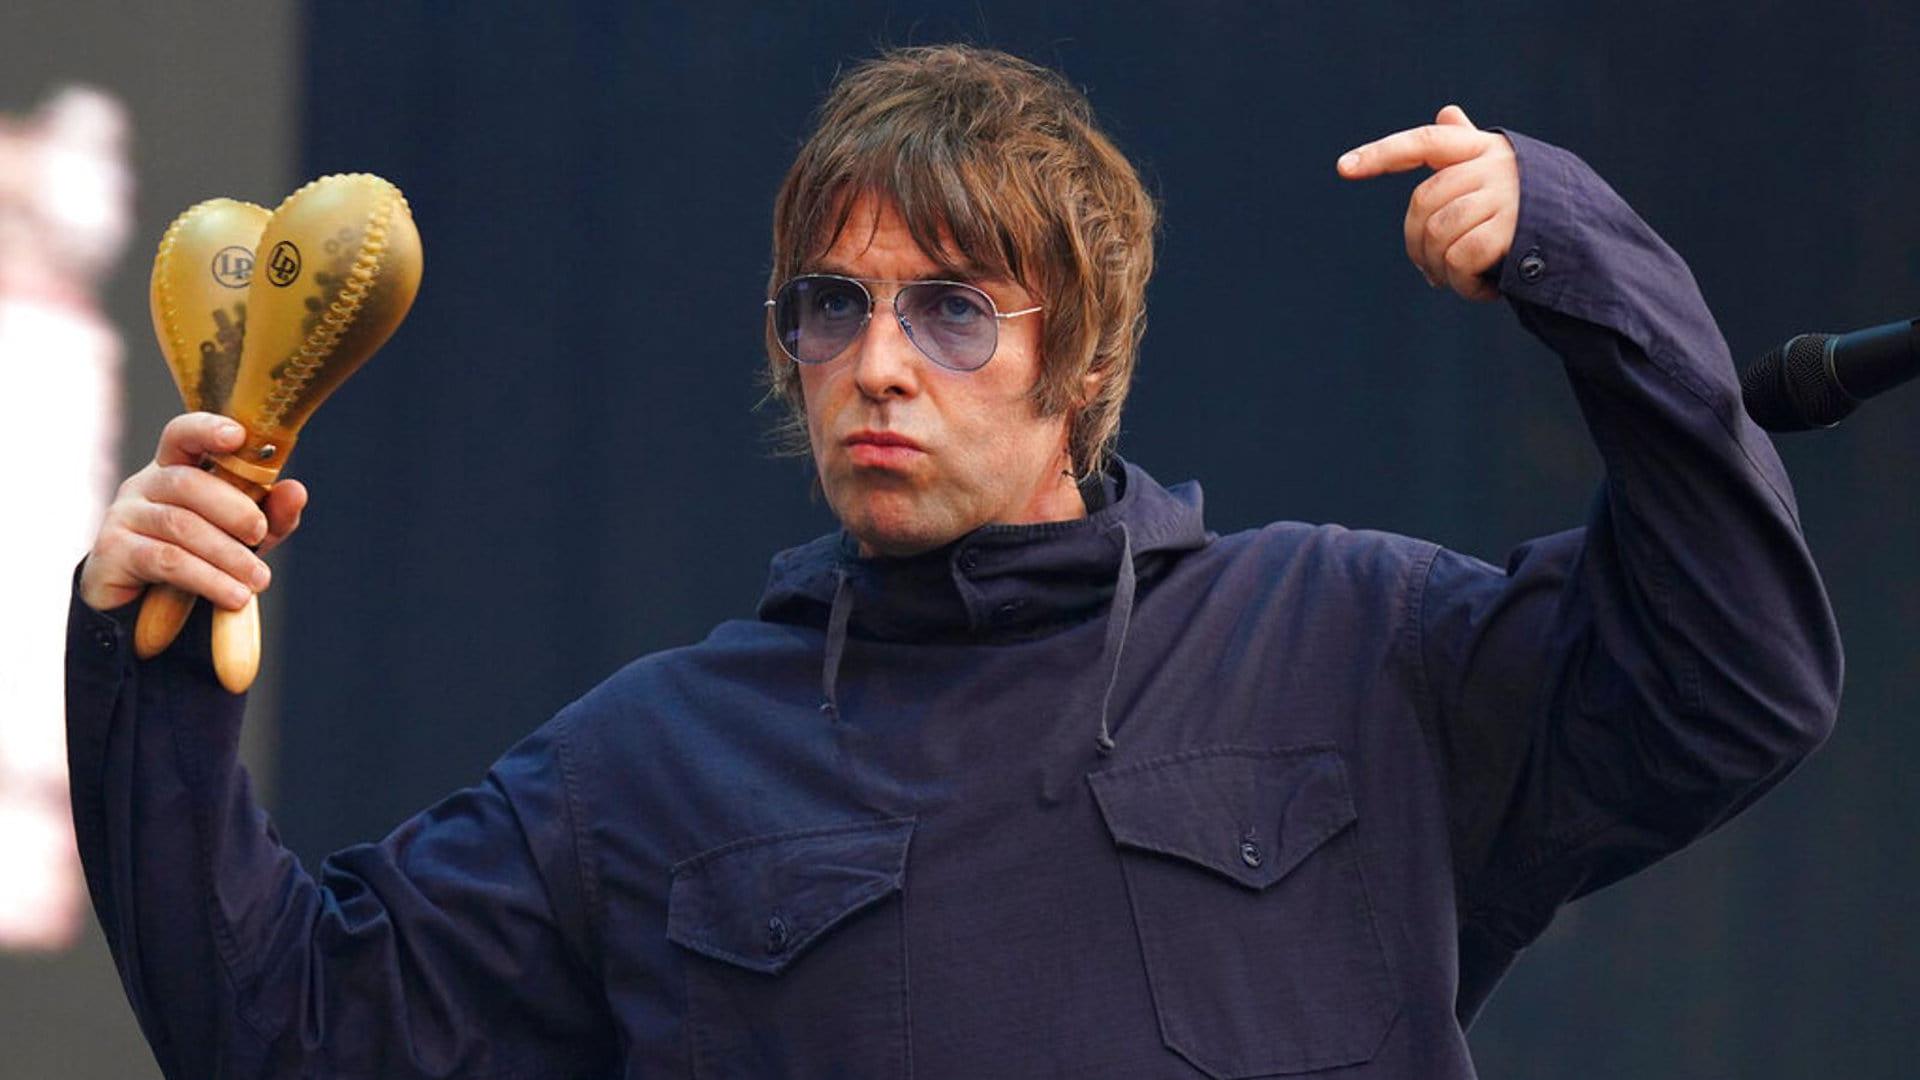 Liam Gallagher Live at Reading Festival backdrop